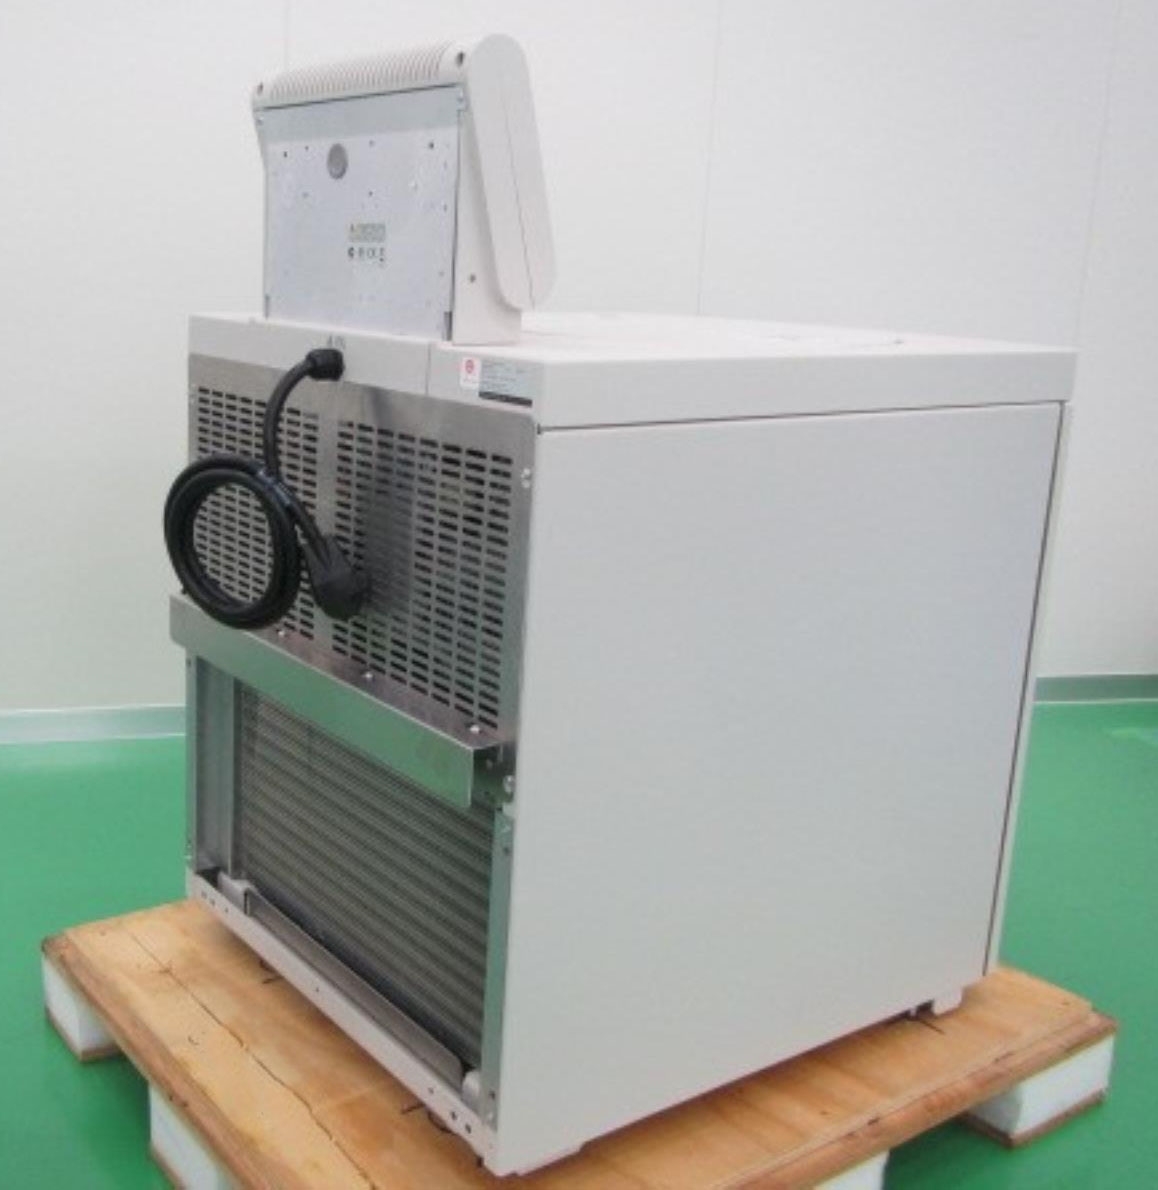 Photo Used BECKMAN COULTER Avanti HP-30I For Sale